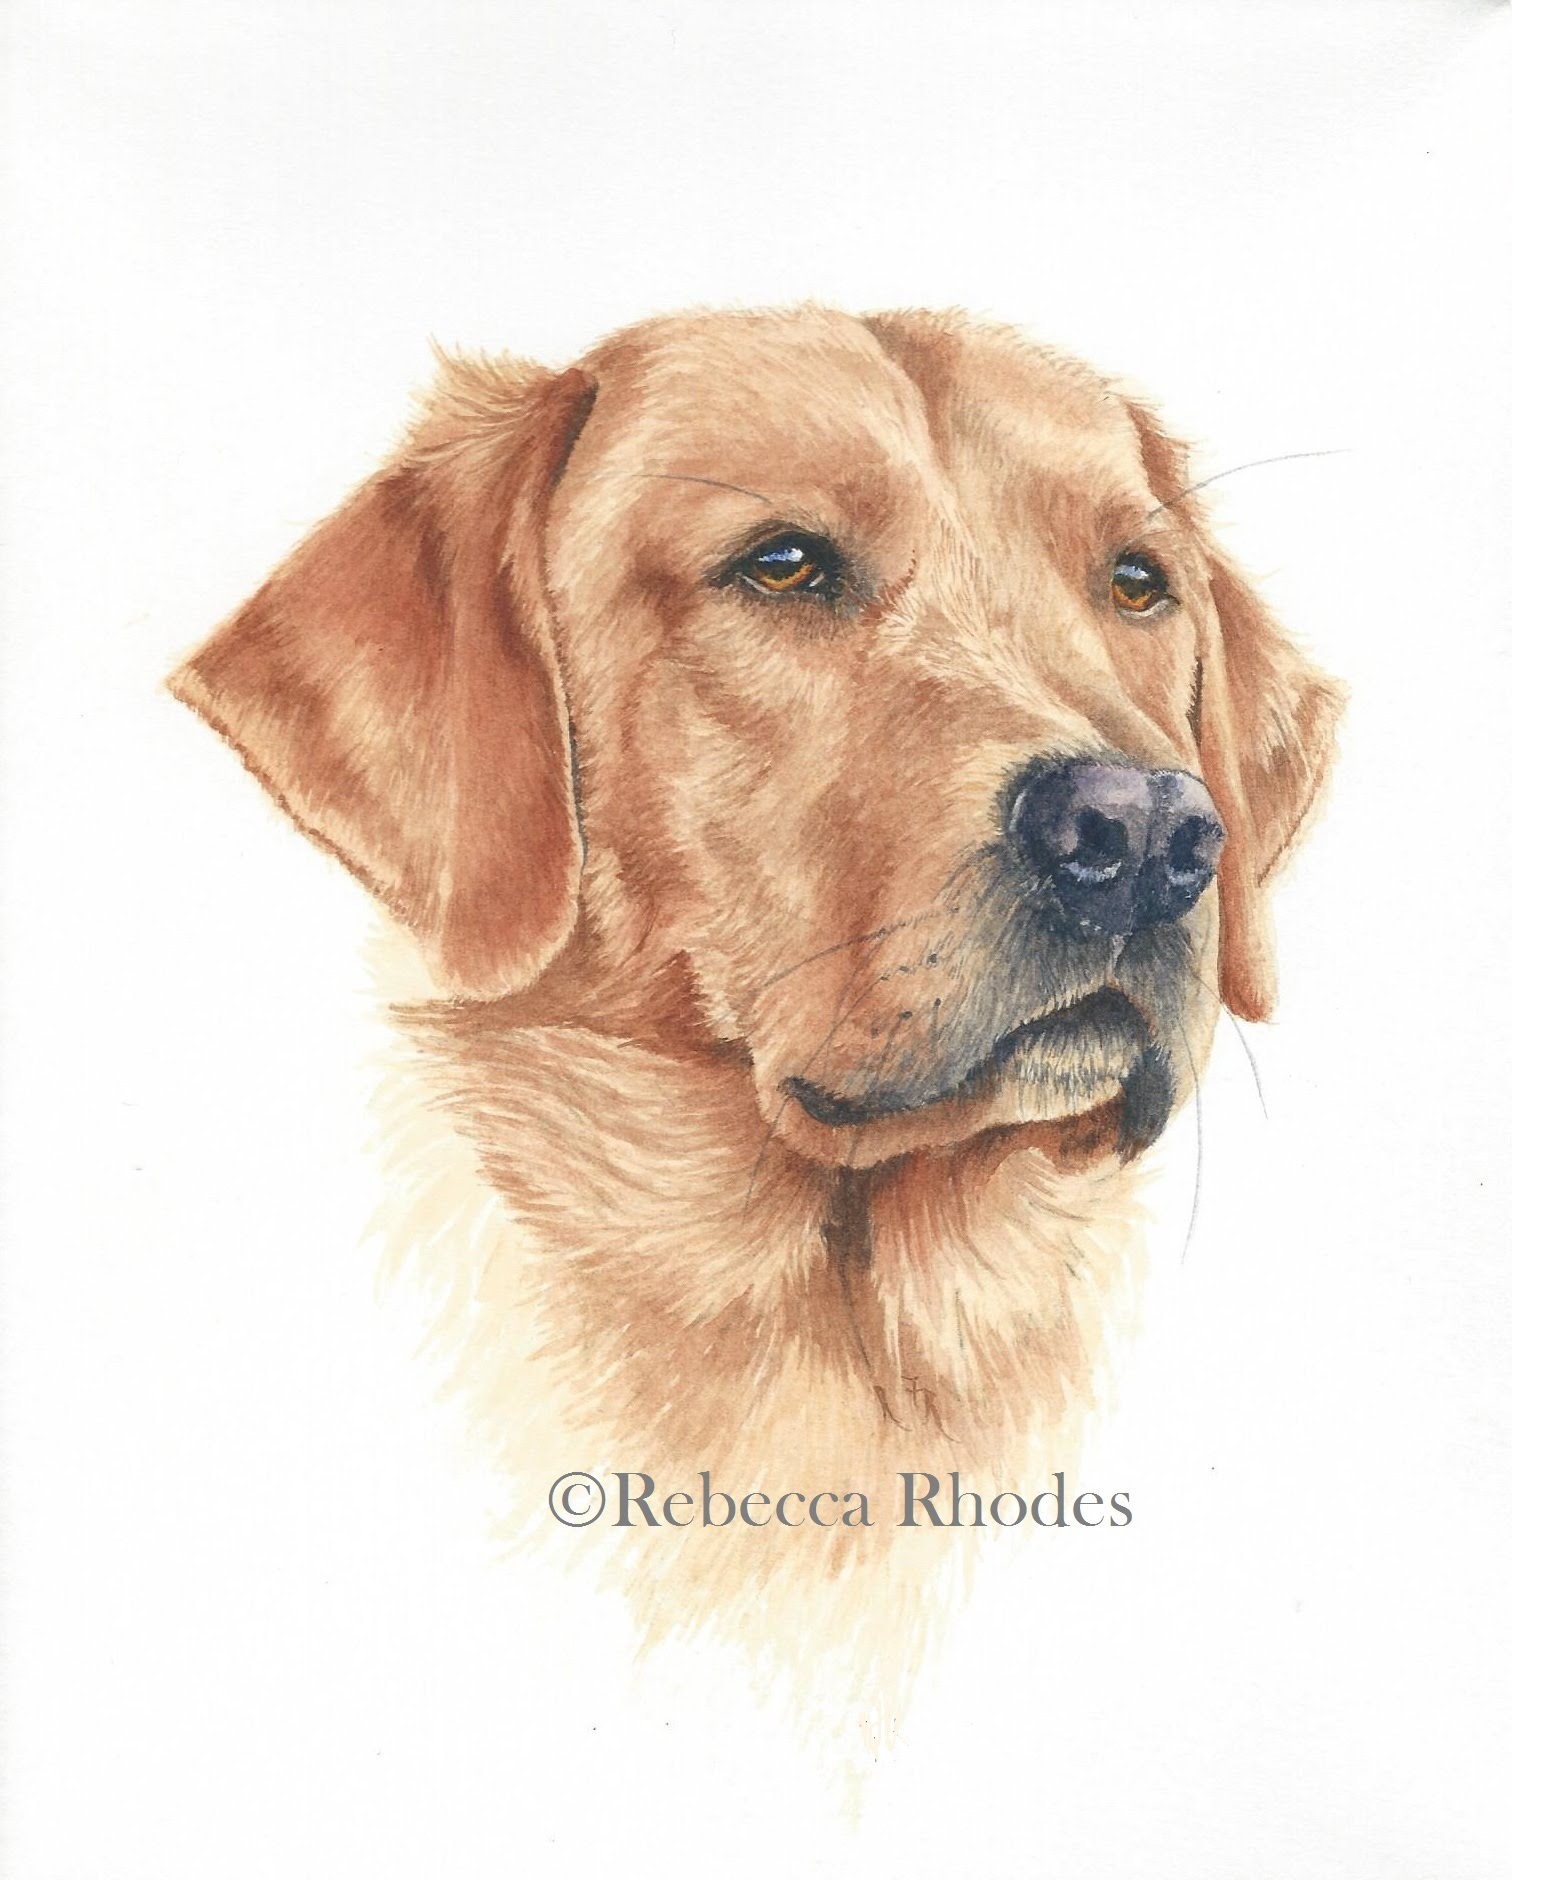 How to Paint a Realistic Retriever Dog in Watercolor - YouTube